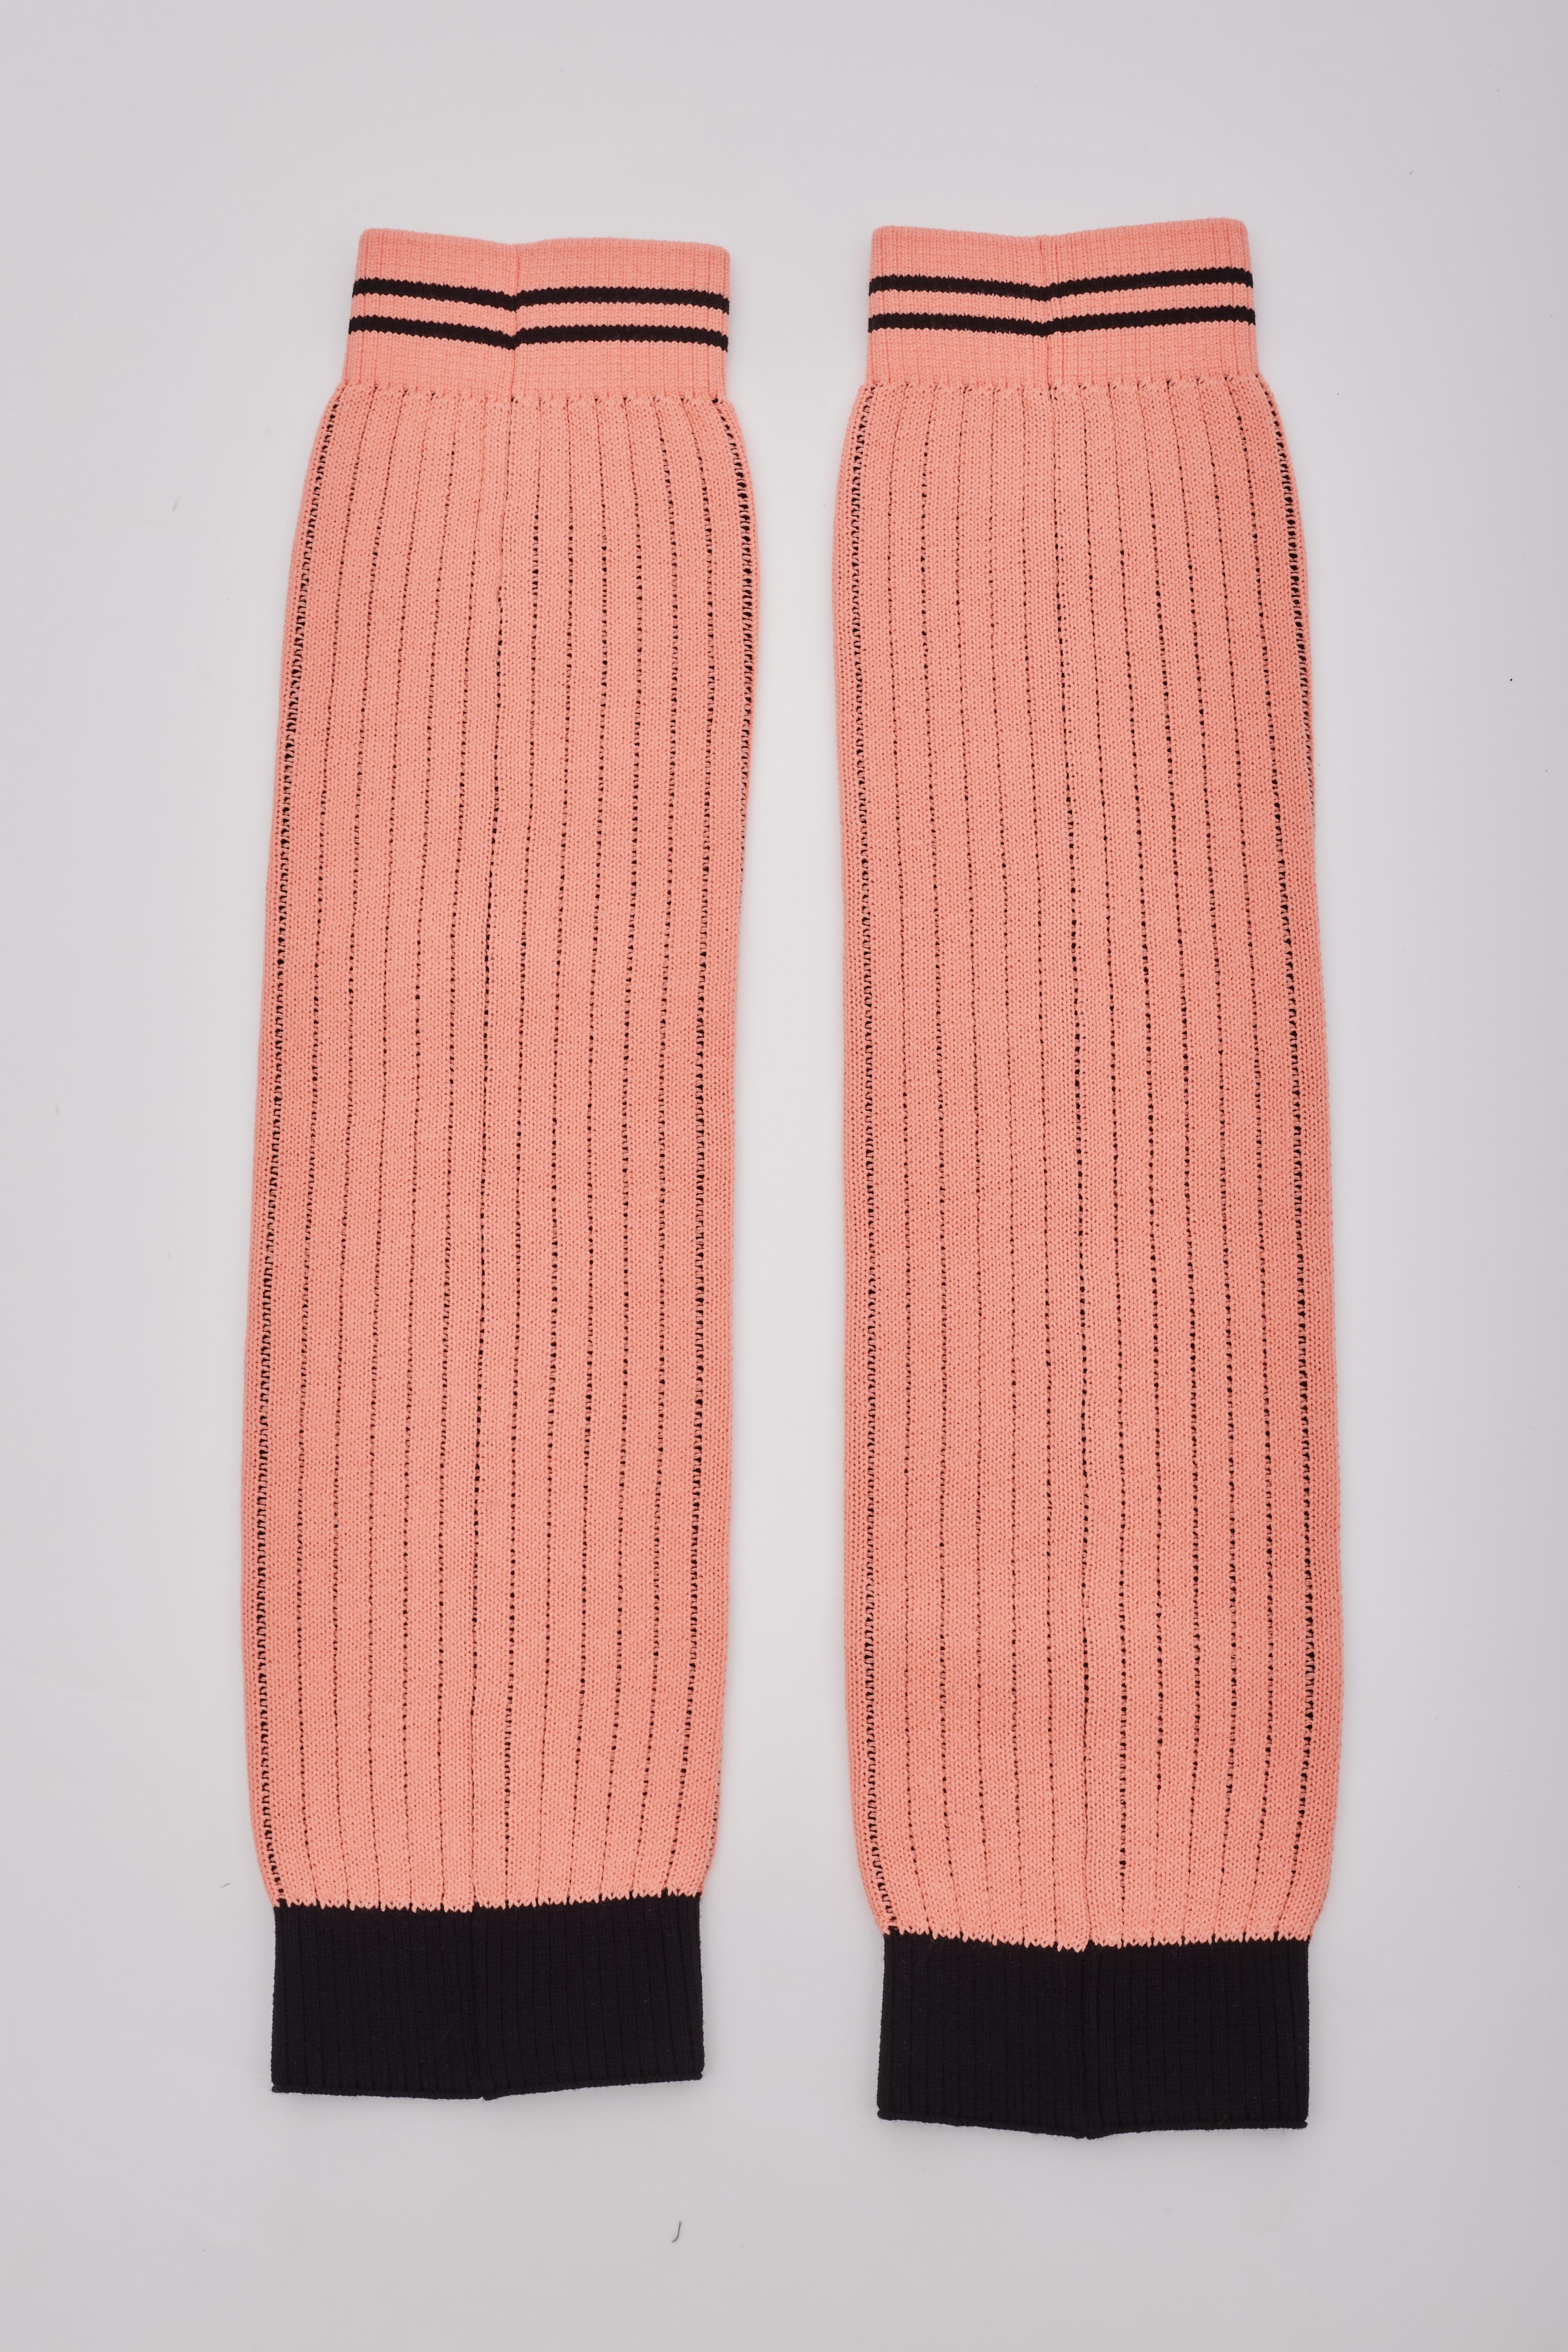 Chanel Logo Apricot Knit Leg Warmers Gaiters In New Condition For Sale In Montreal, Quebec